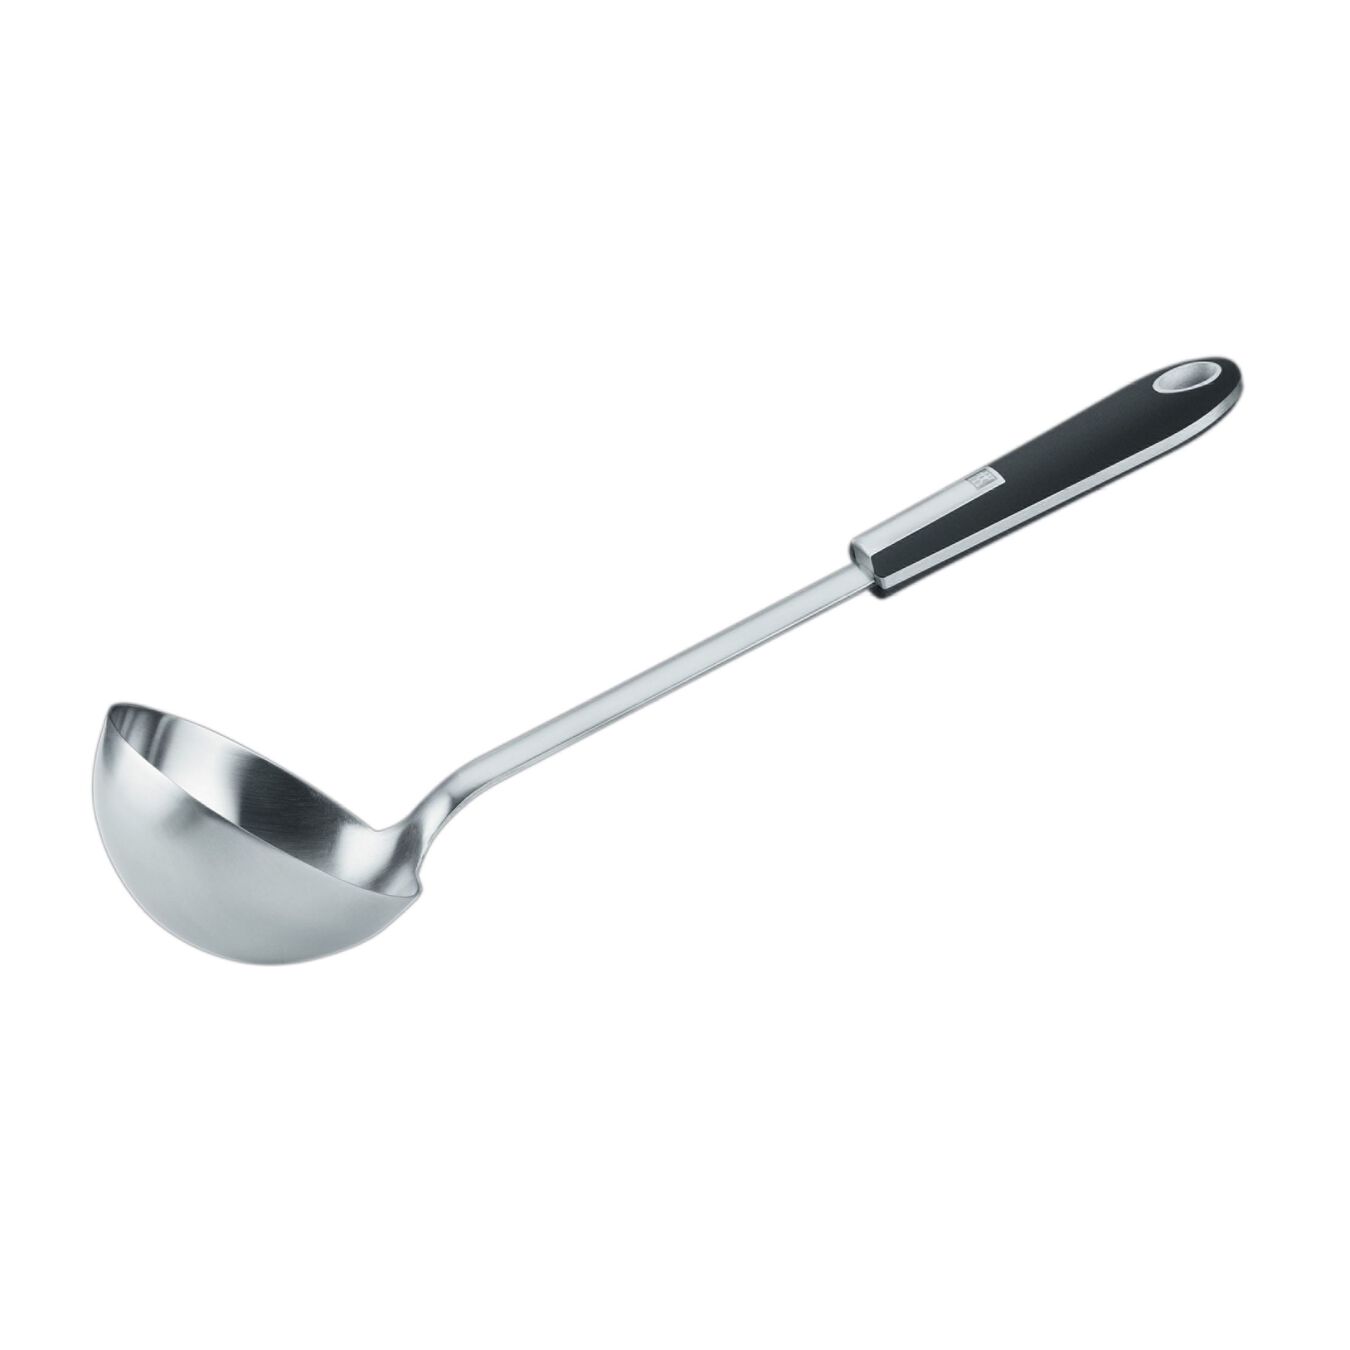 Soup ladle, 37 cm, 18/10 Stainless Steel,,large 1